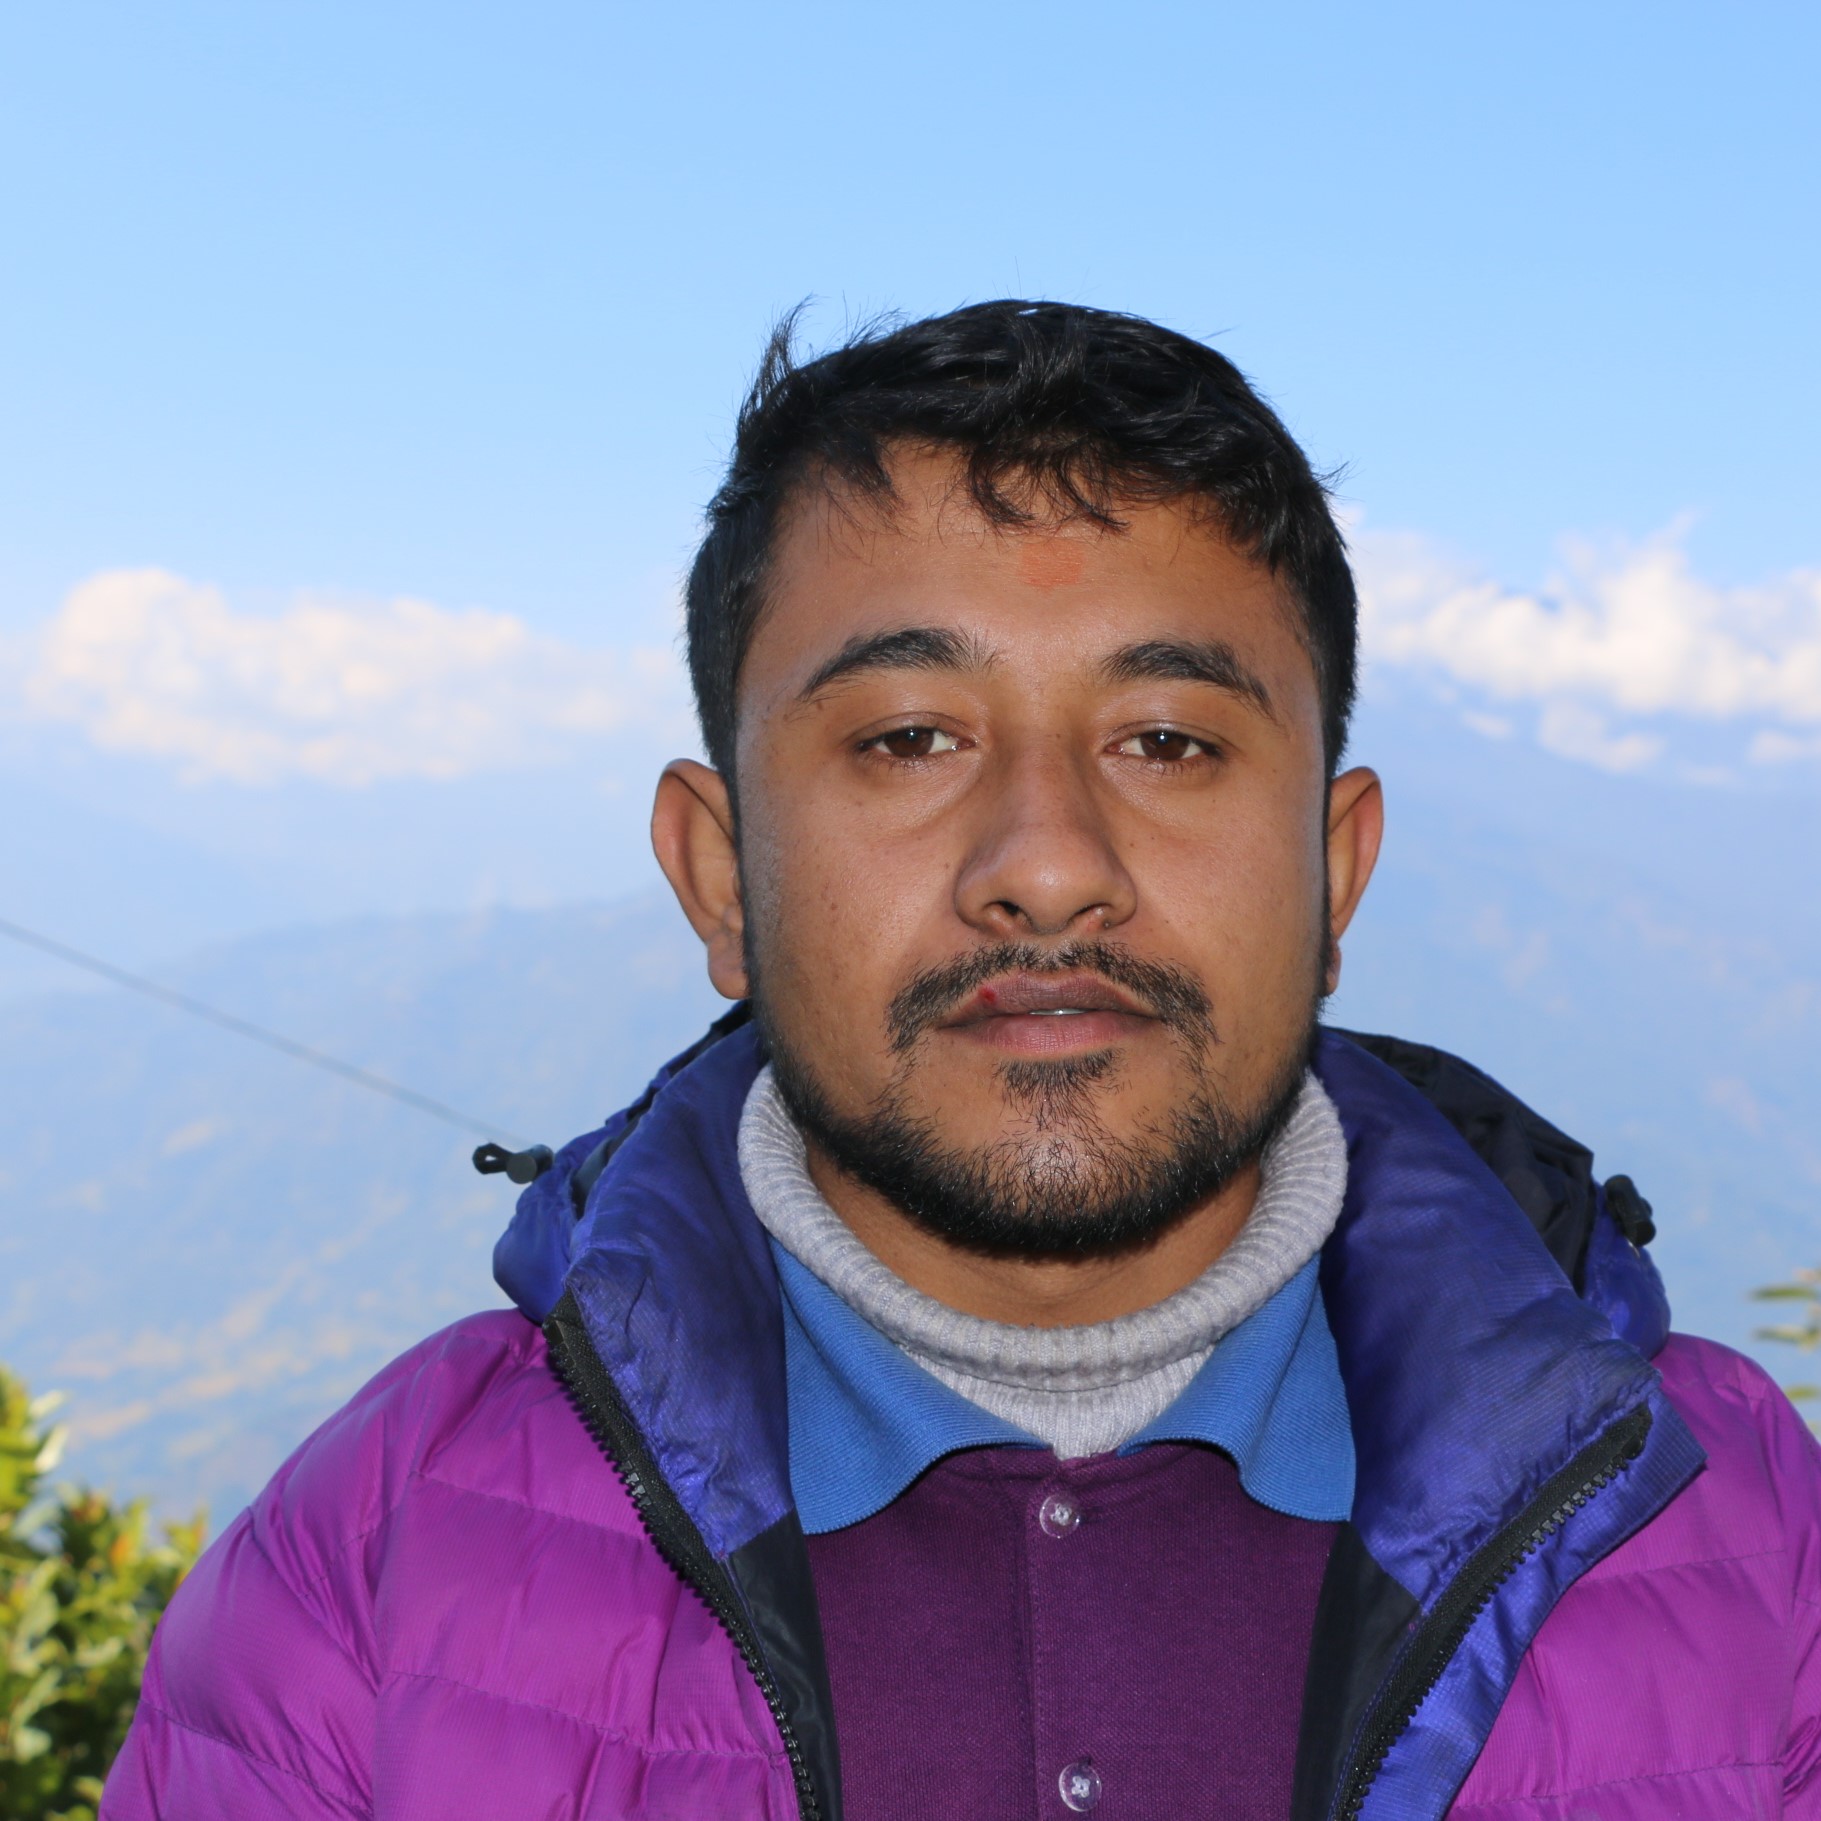 Dinesh Poudel